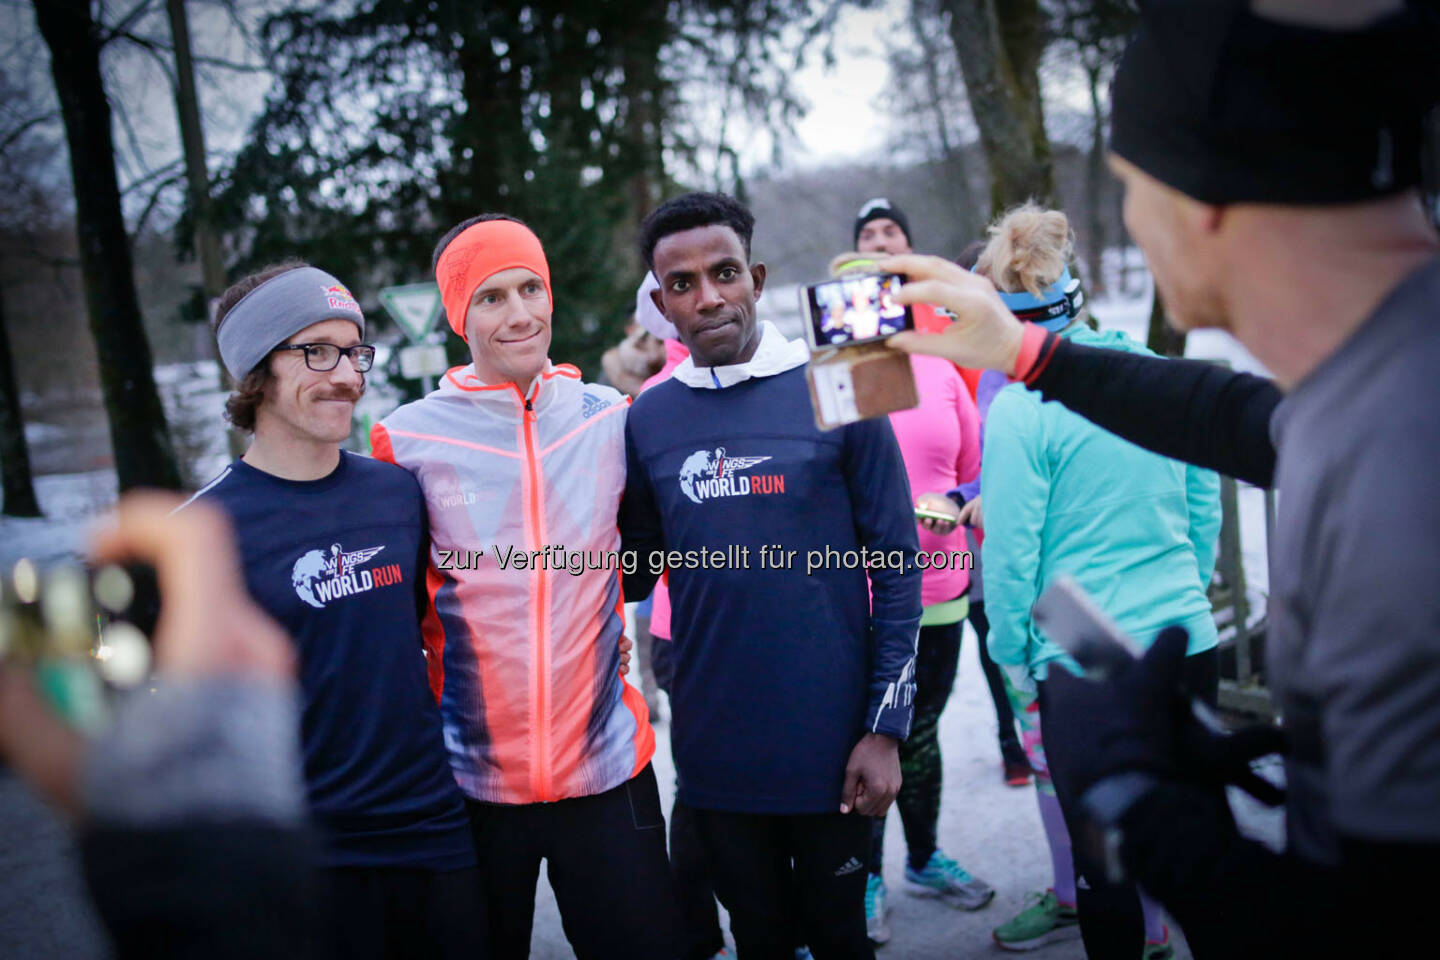 Florian Neuschwander ( left ) and 
Lemawork Ketema ( right ), Werner Schrittwieser (middle) with participants at the Wings for Life World Run event in Munich 23rd of January 2016 (Bild: Daniel Grund)